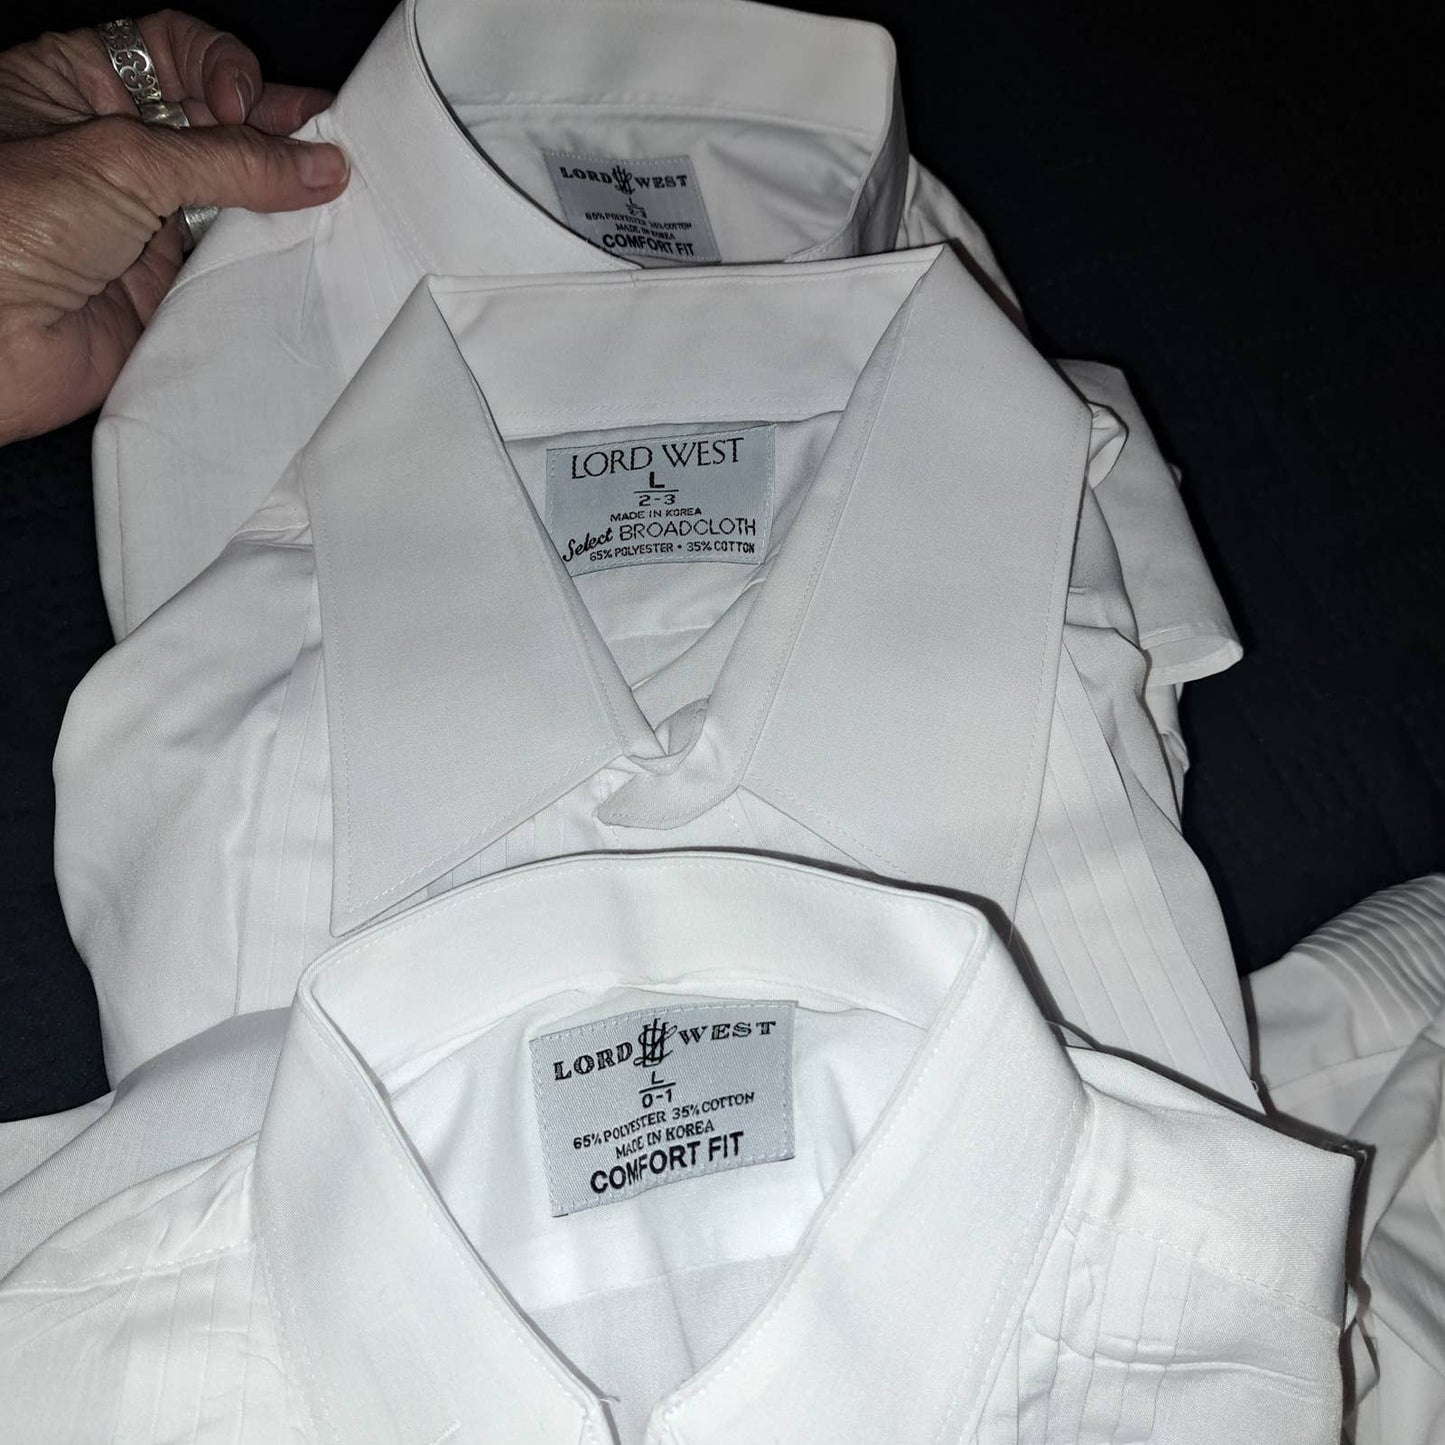 7 TUX Shirts INCLUDED - 6 Men's Size Large/ or womens XL one is 2XL